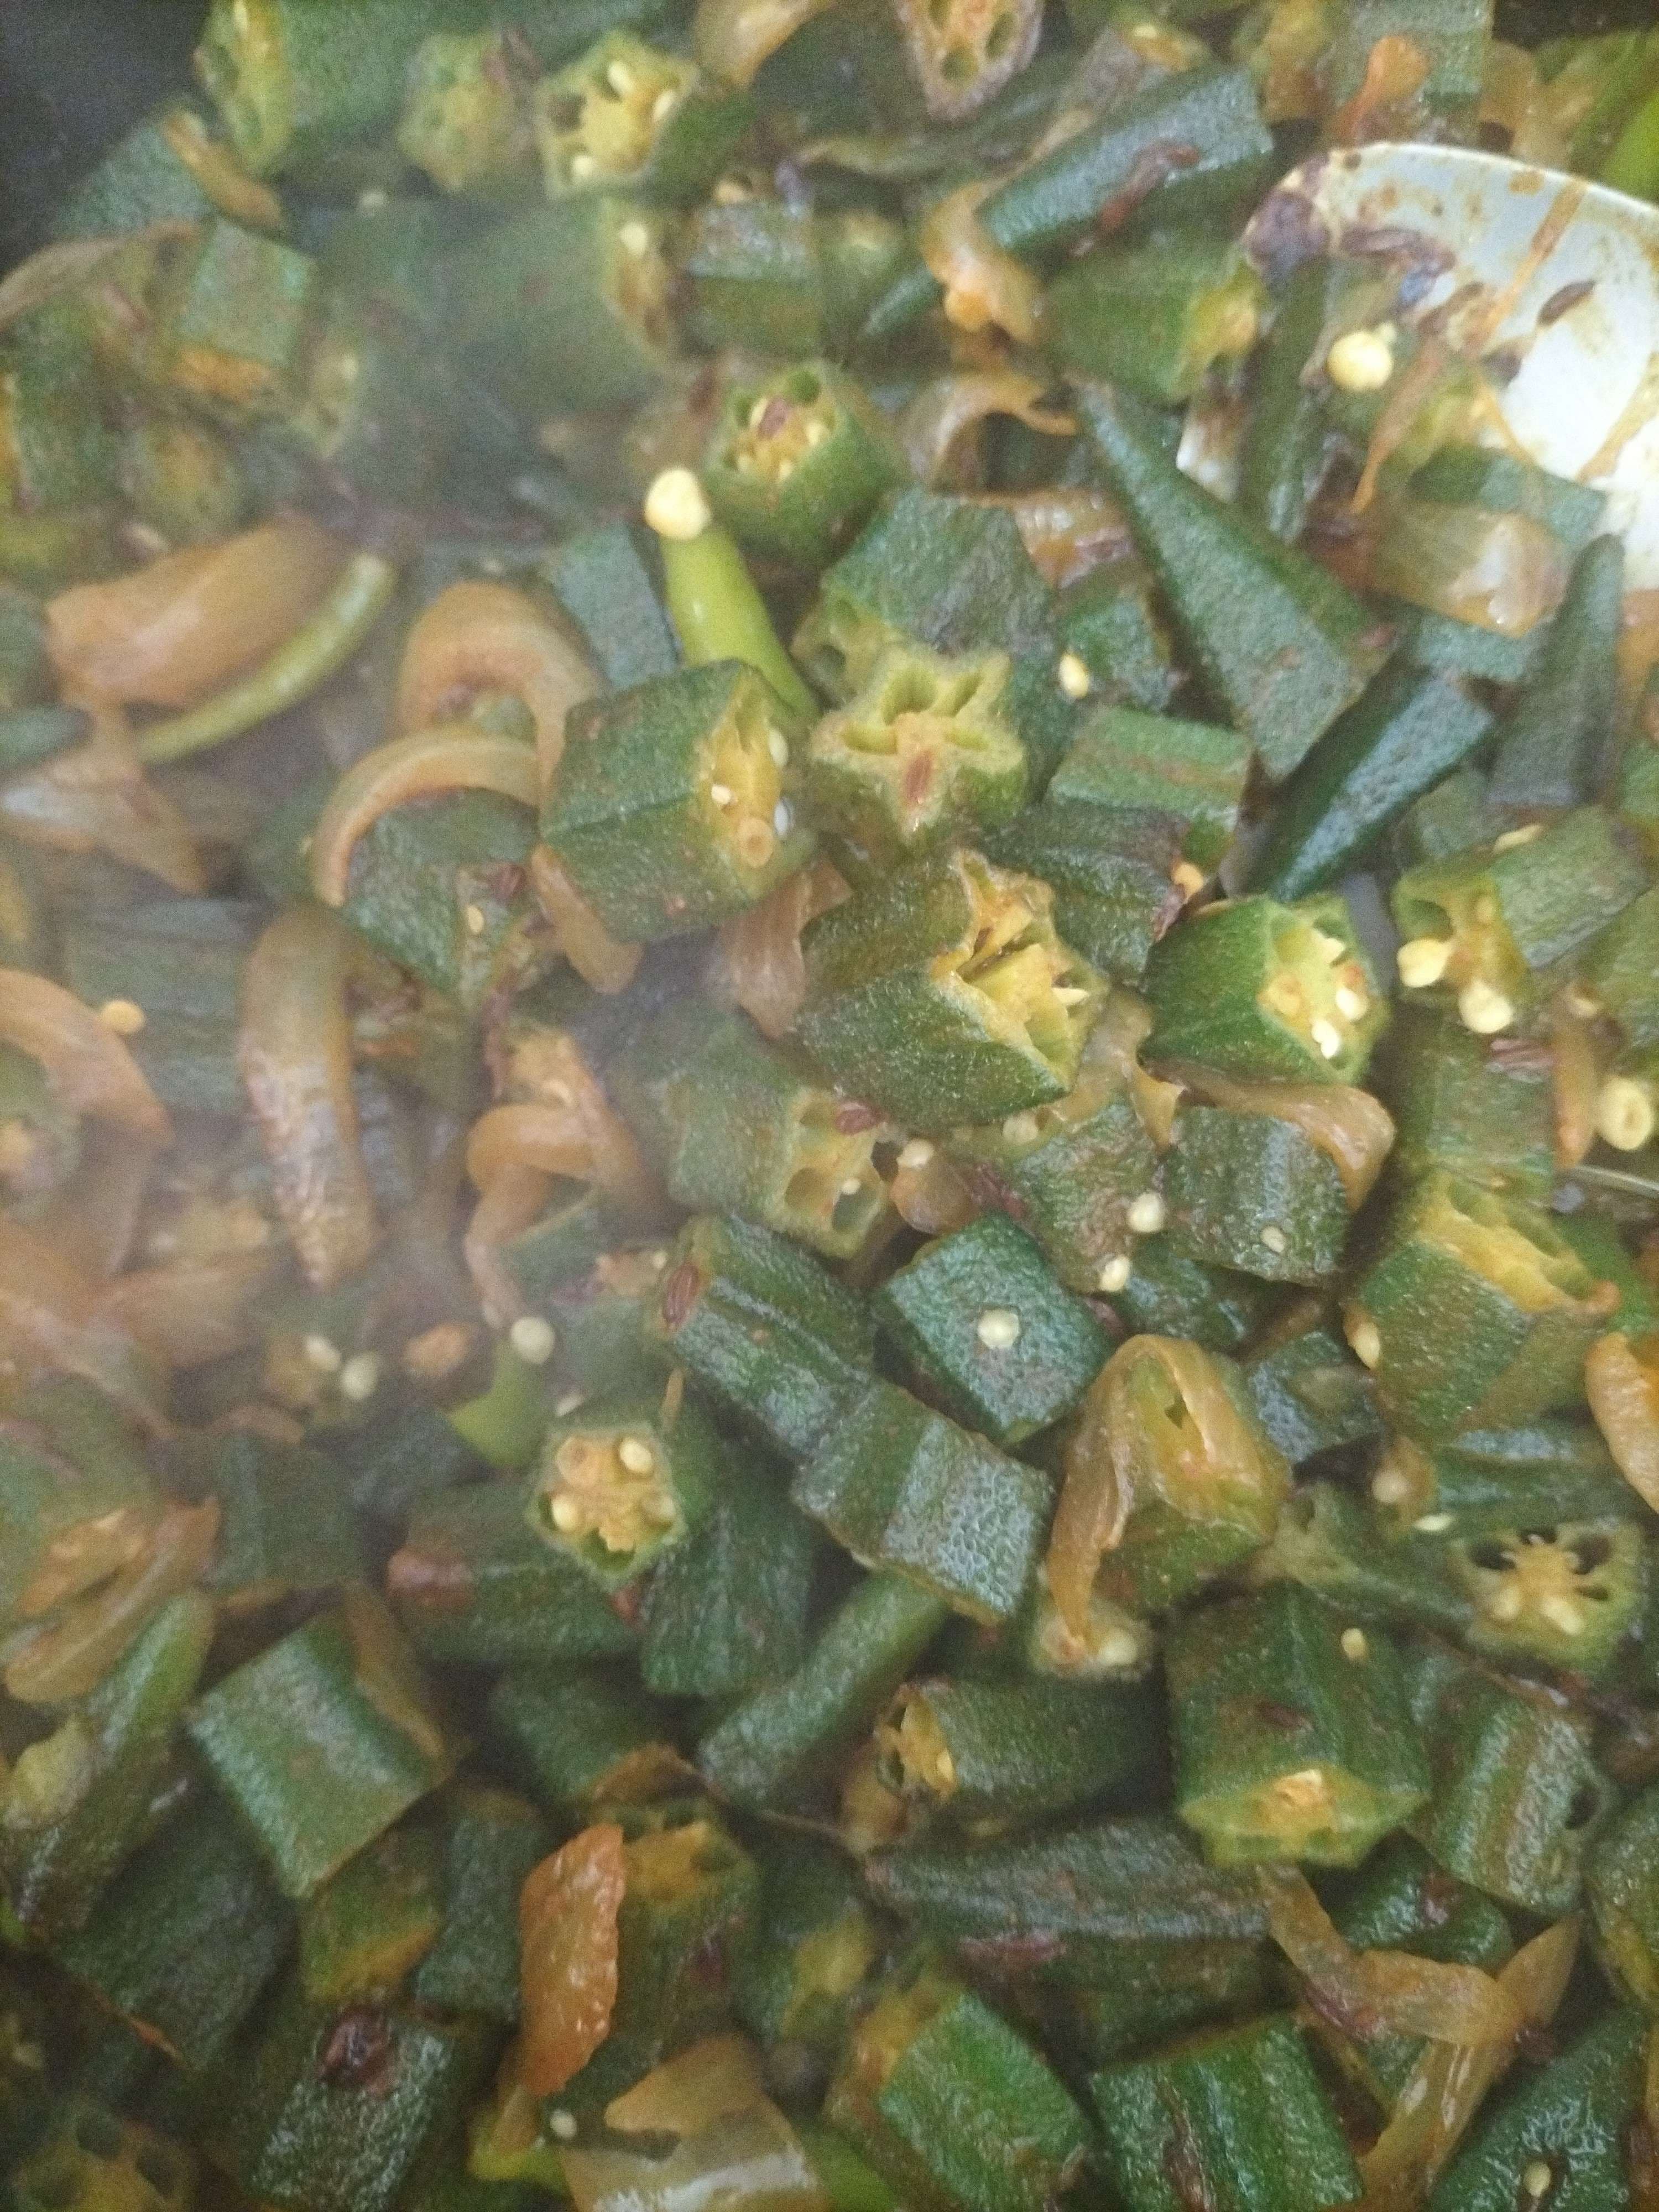 Delicious Bhindi prepared by COOX